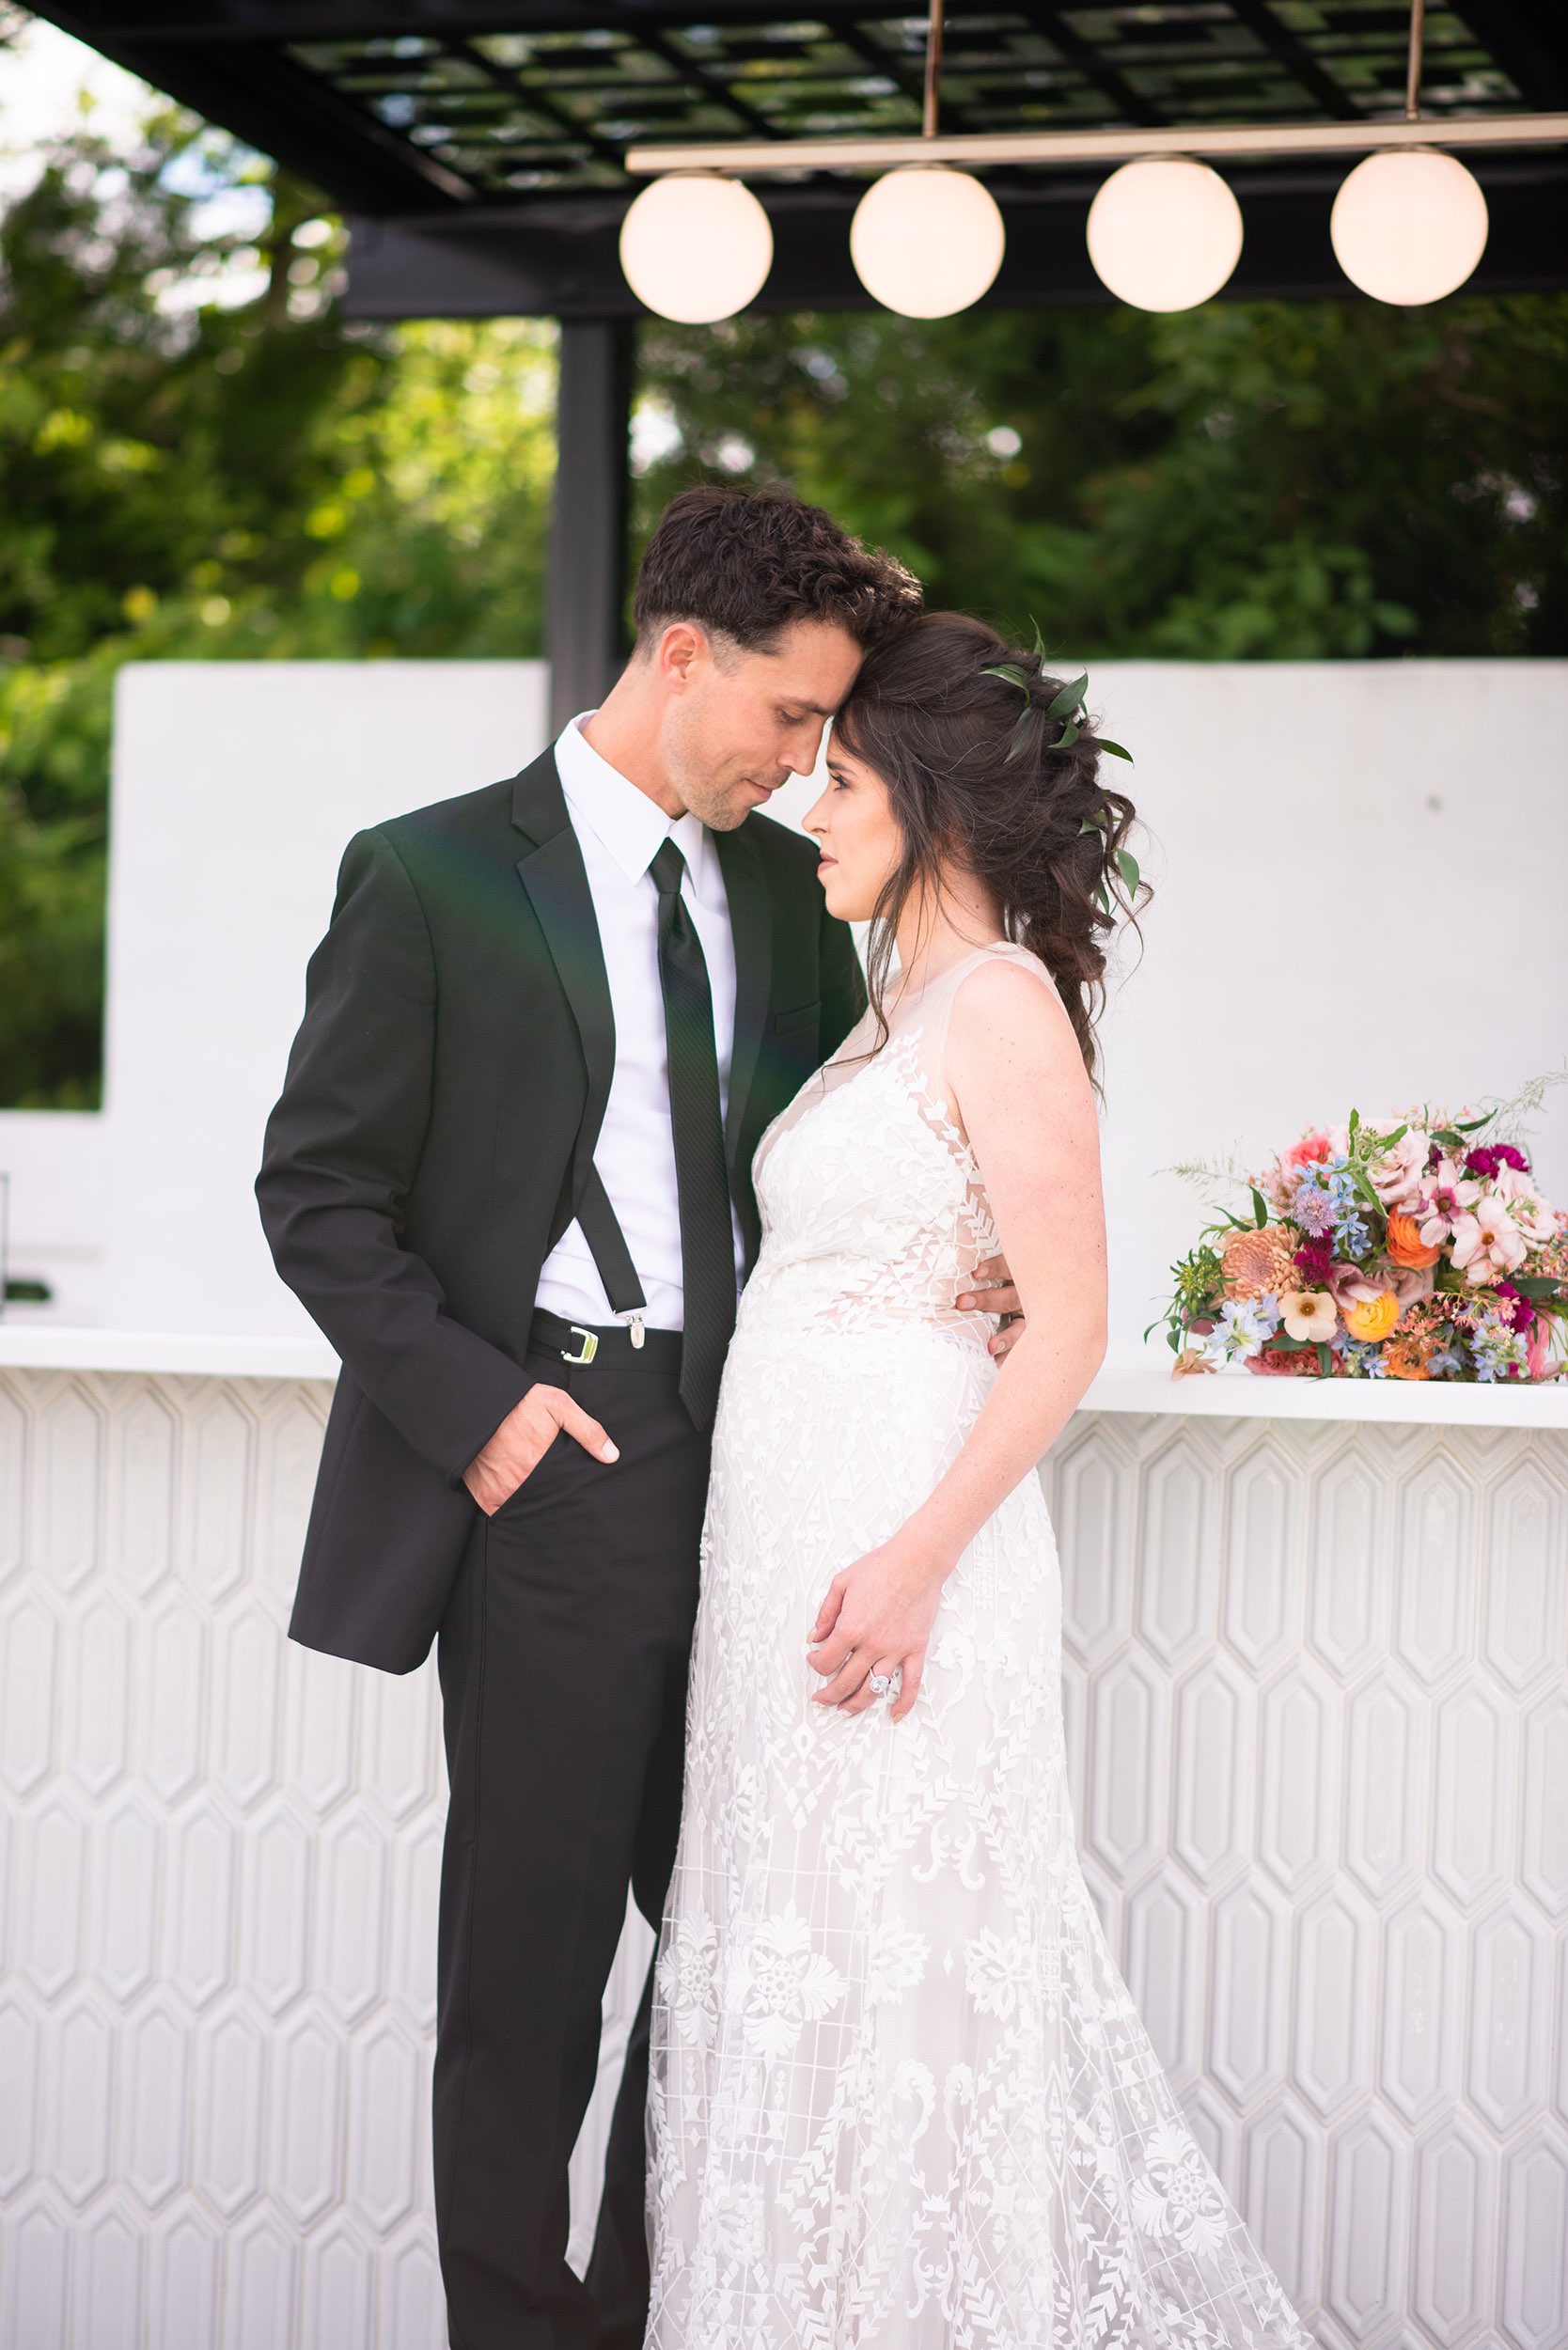 Bride in boho gown and groom in black suit with black tie.